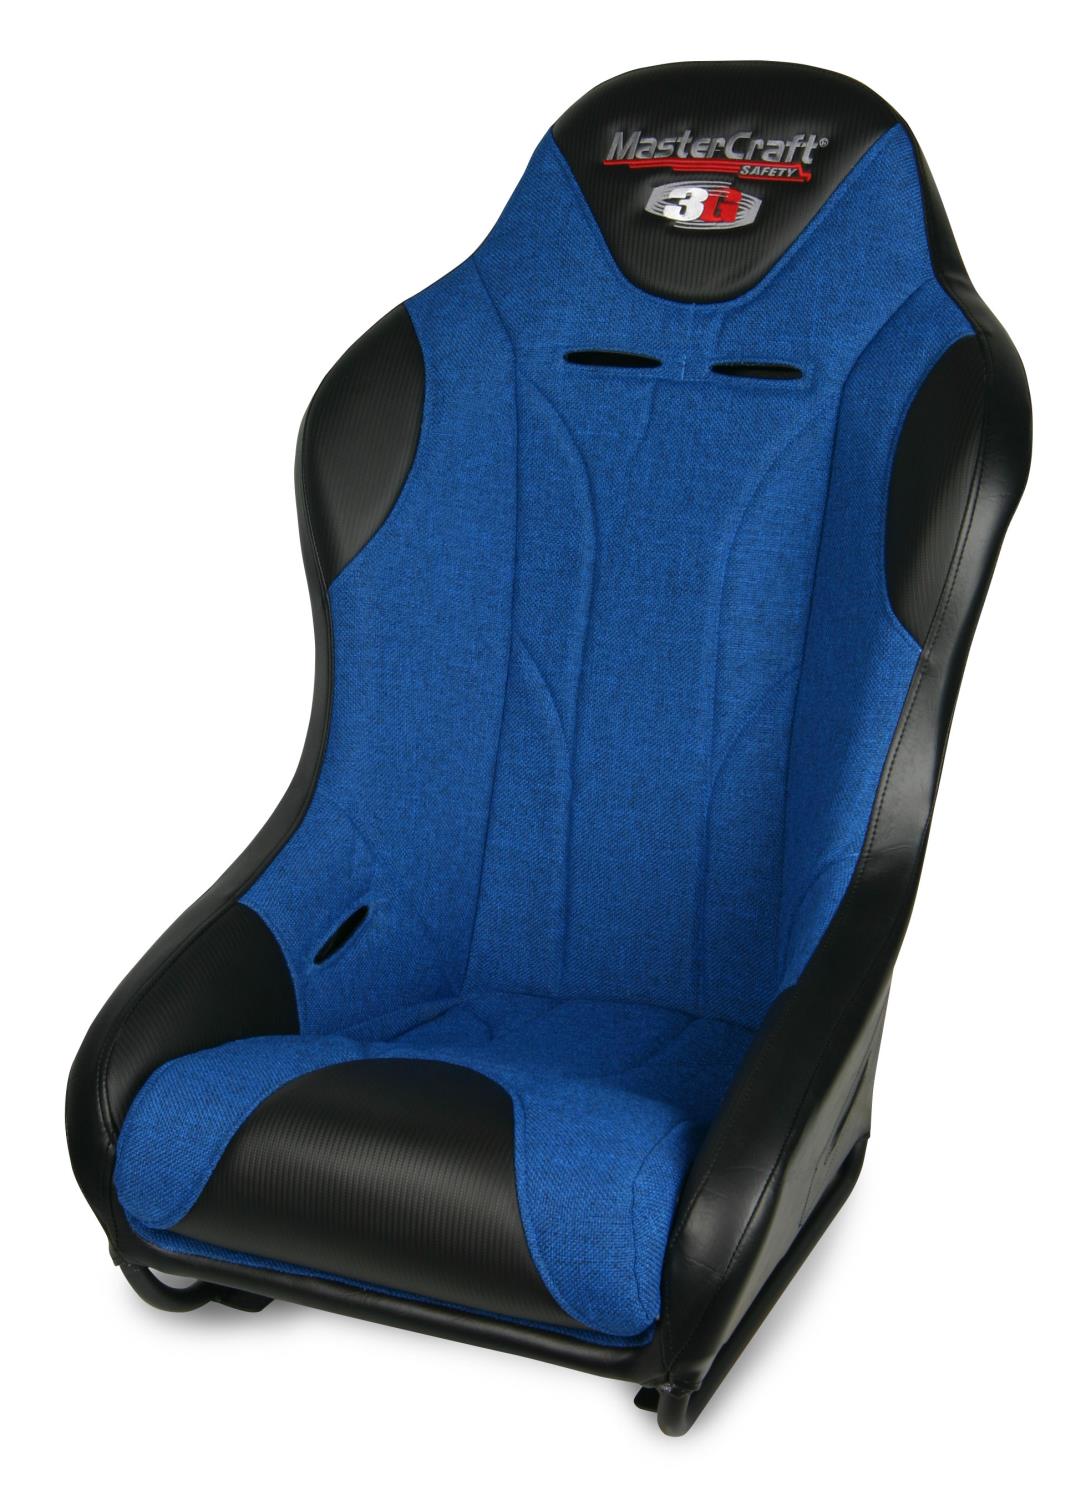 568033 2 in. WIDER 3G Seat w/DirtSport Stitch Pattern, Black with Blue Fabric Center and Blue Side Panels, Black Band